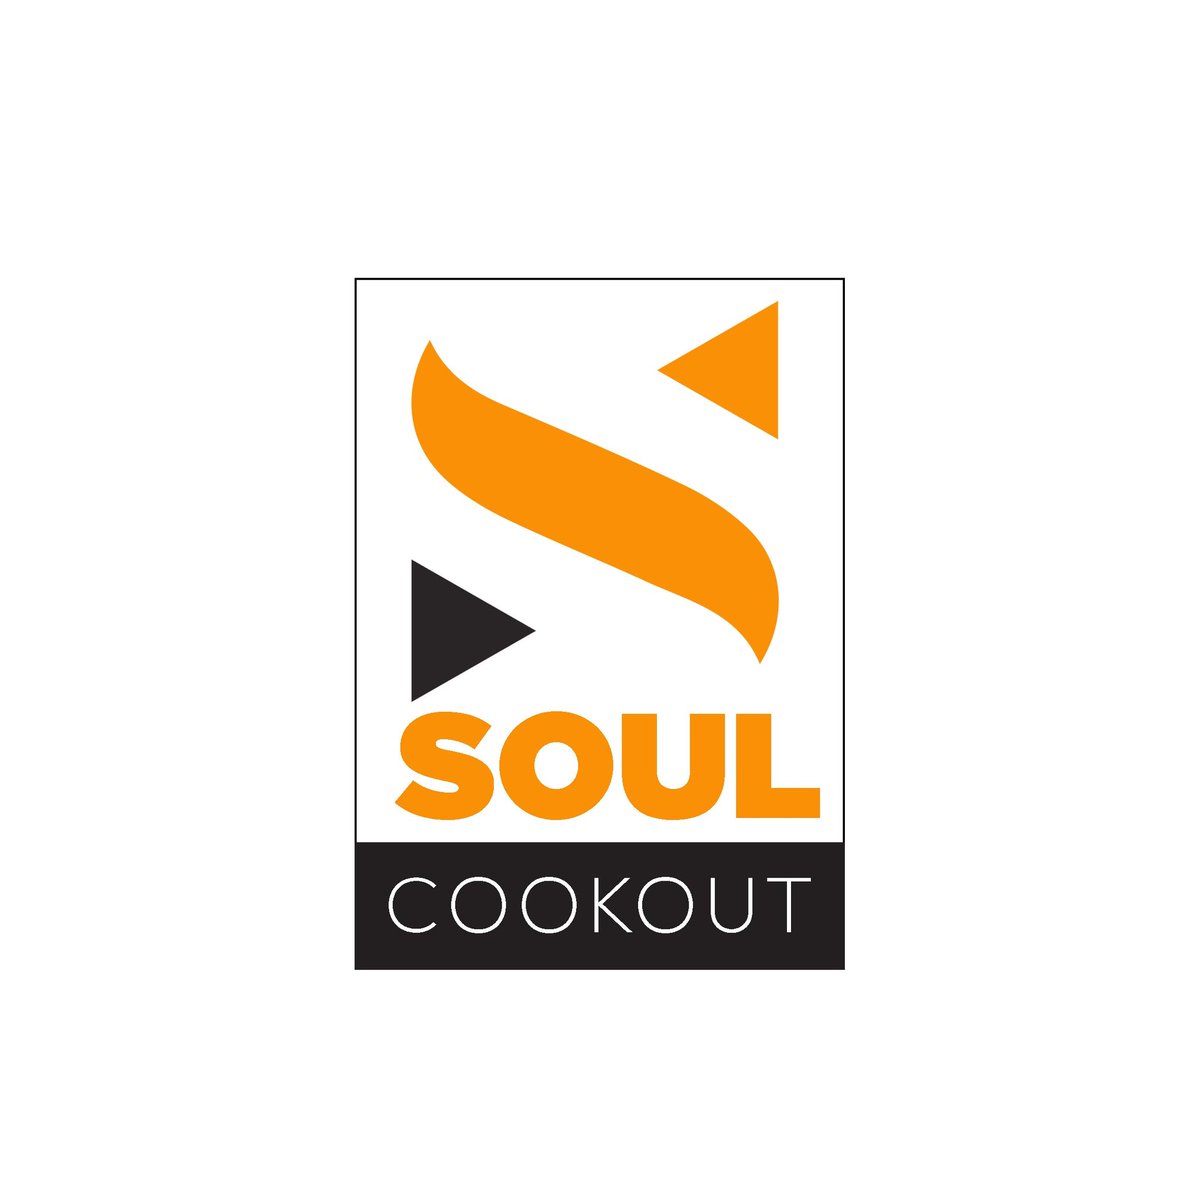 Spot this logo at the @HighlanderBosso and @Dynamosfczw and you could walk away with ticket to the #SoulCookOut on Saturday